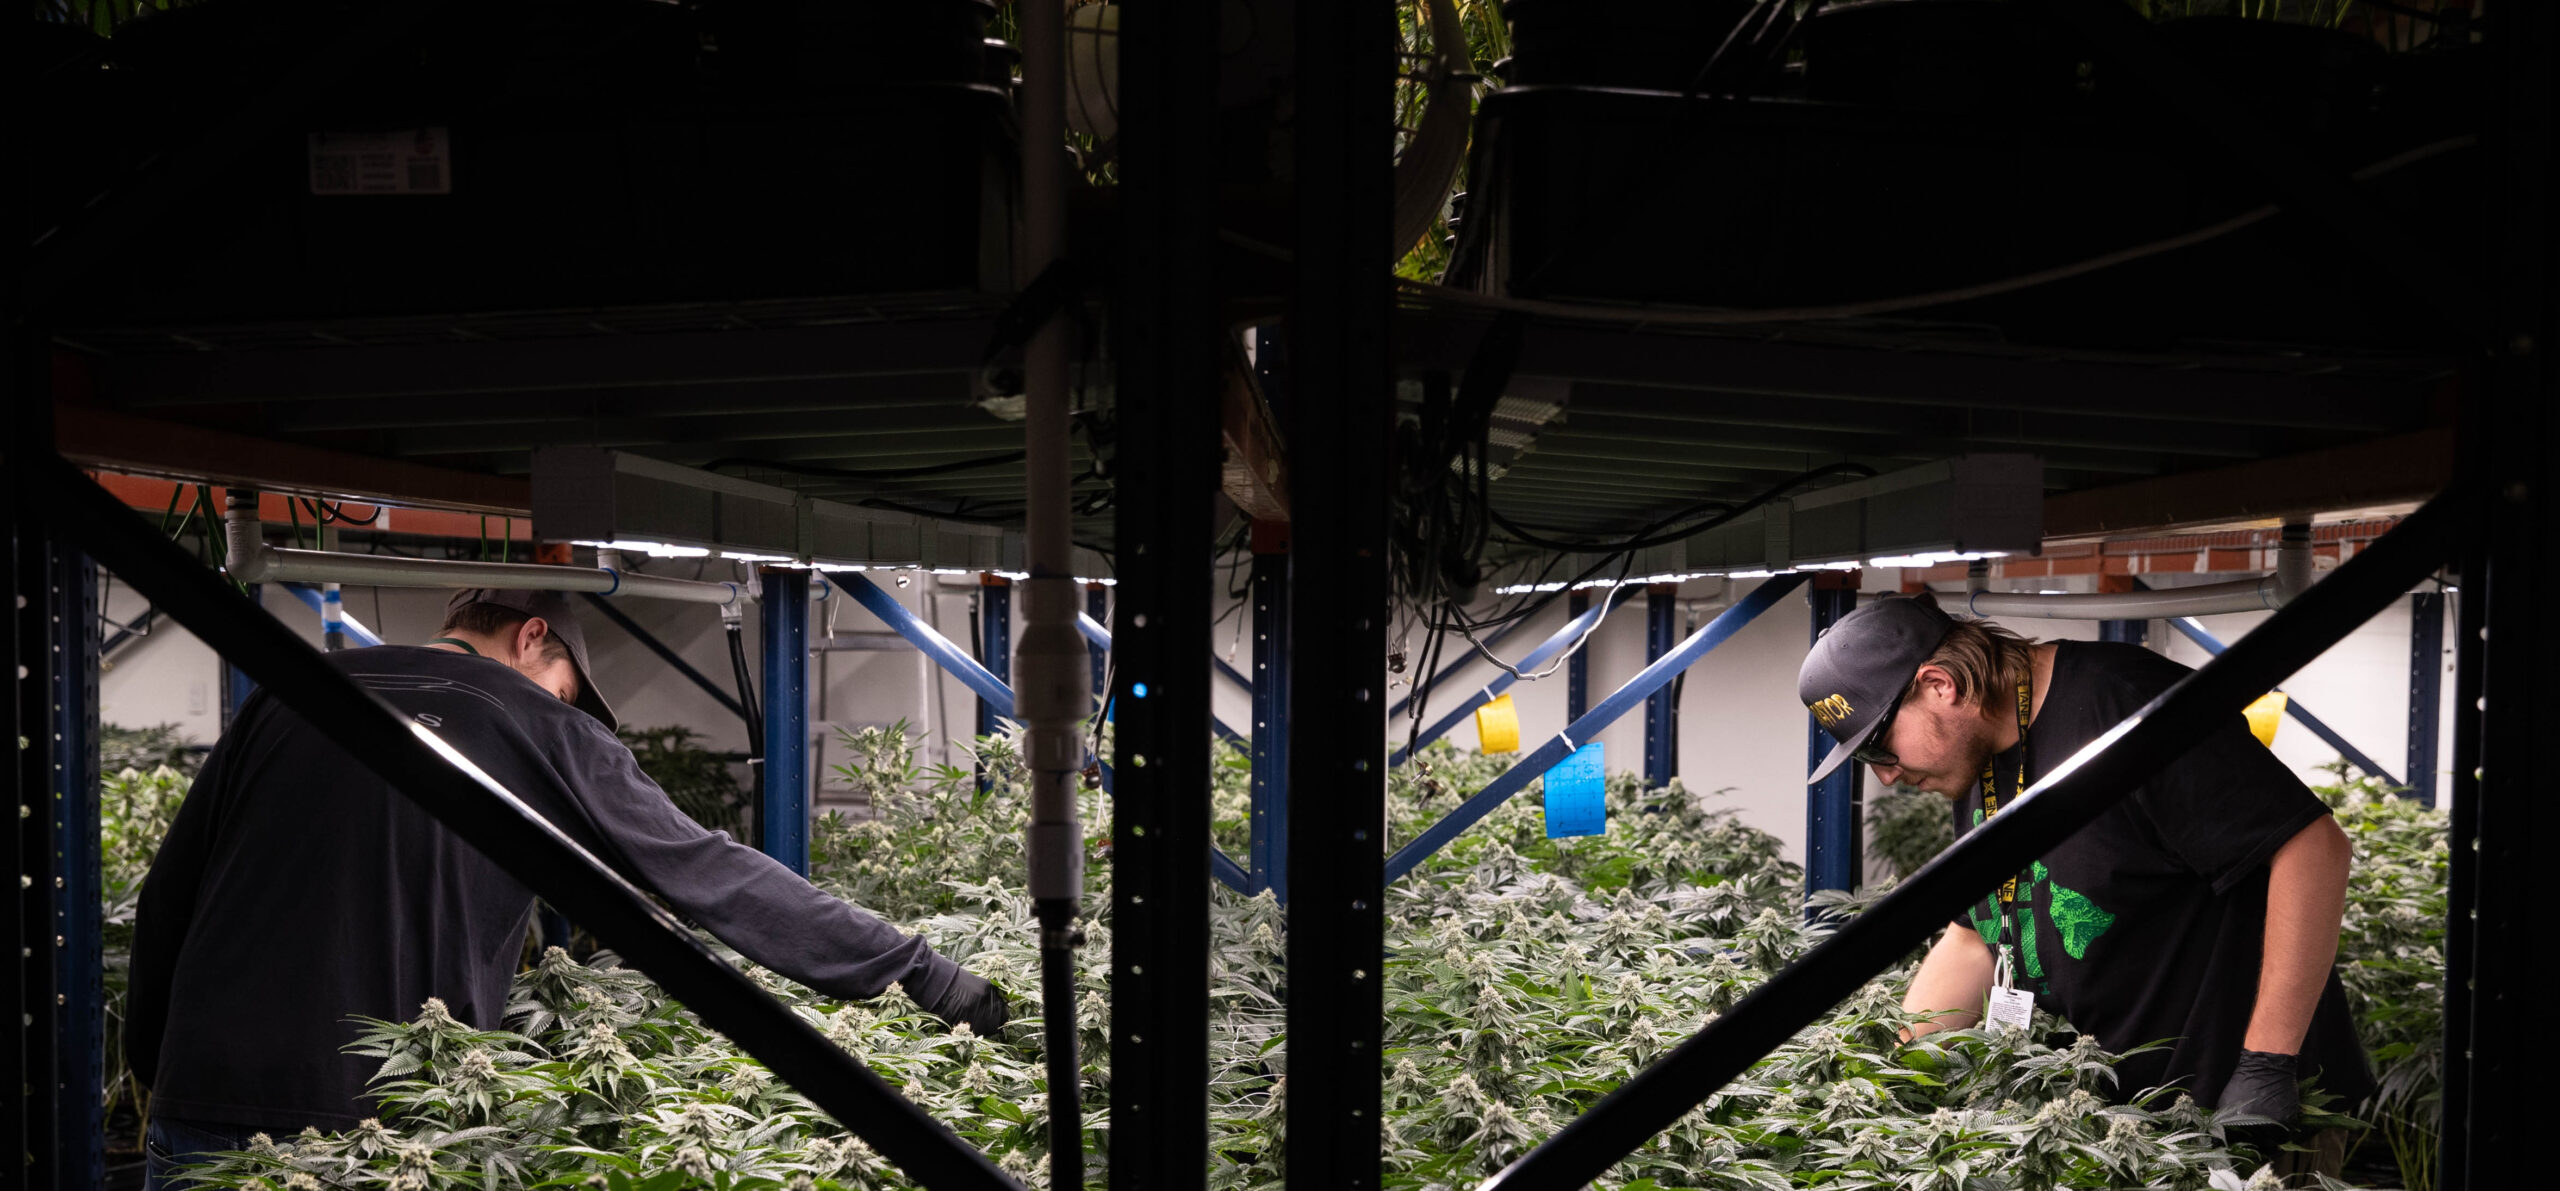 Photograph of workers growing cannabis under lights.